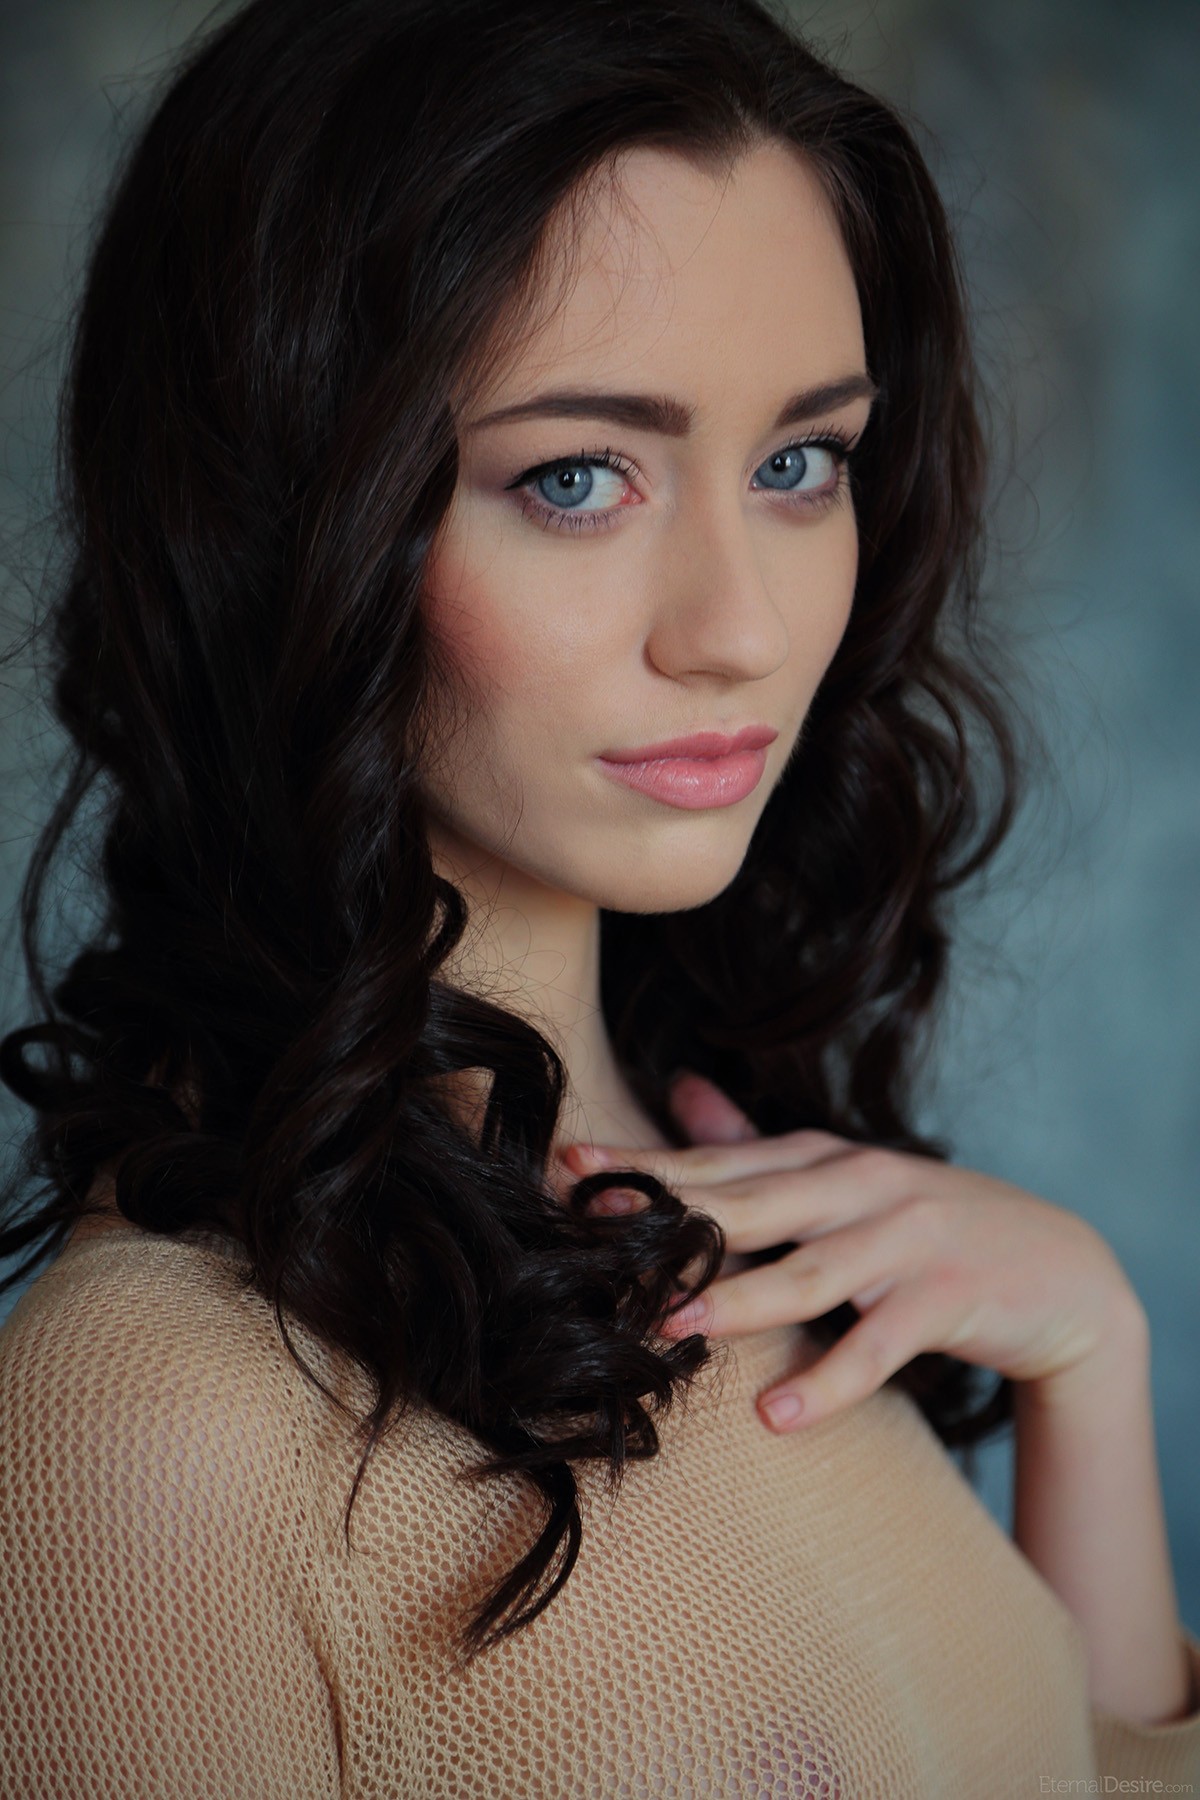 Dark Haired Teen Zsanett Tormay Has Such A Cute Face On Her